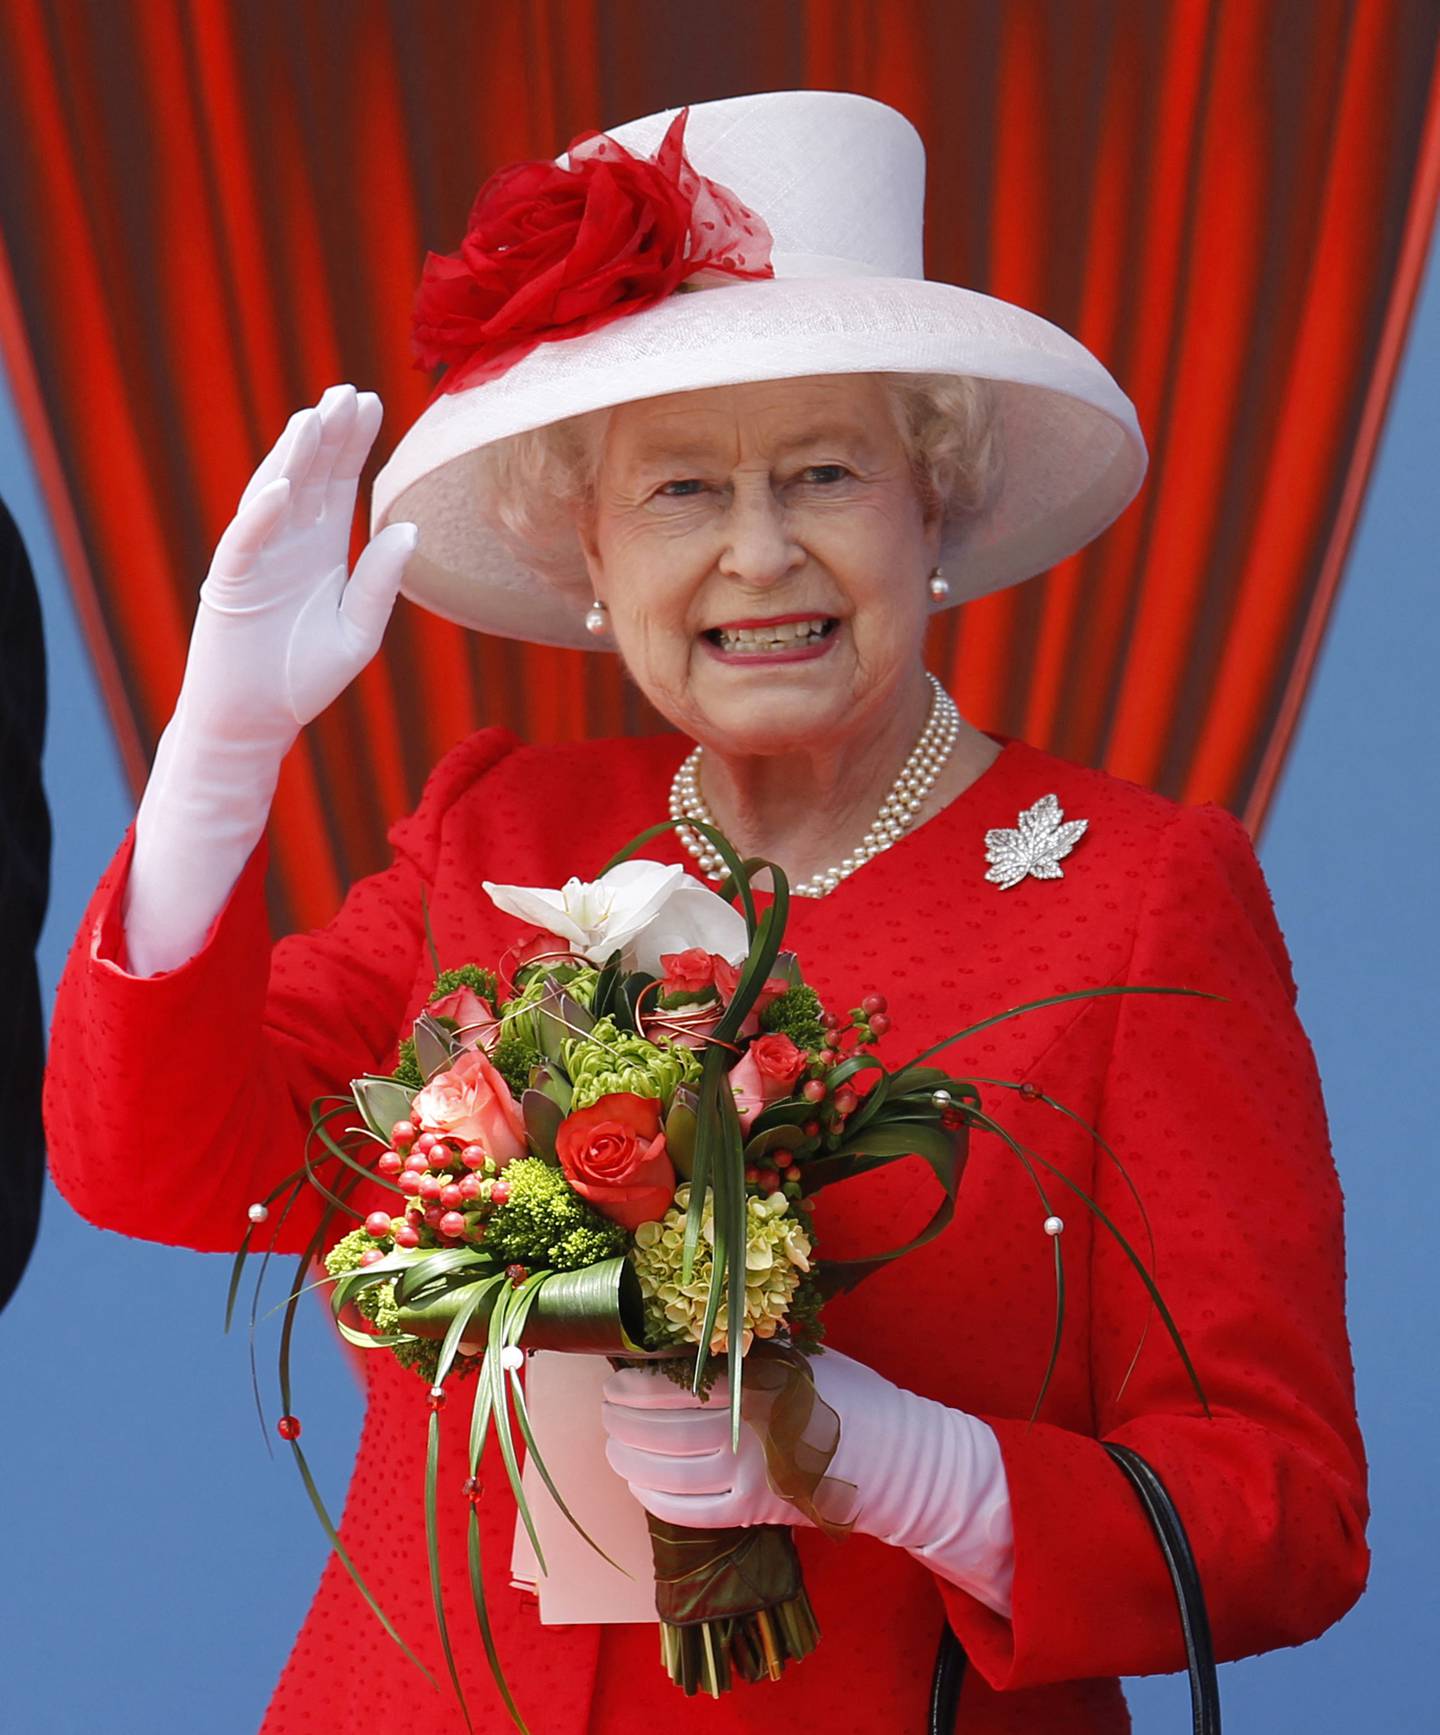 Queen Elizabeth II wears red to attend Canada Day celebrations in Ottawa, Ontario on July 1, 2010. AFP